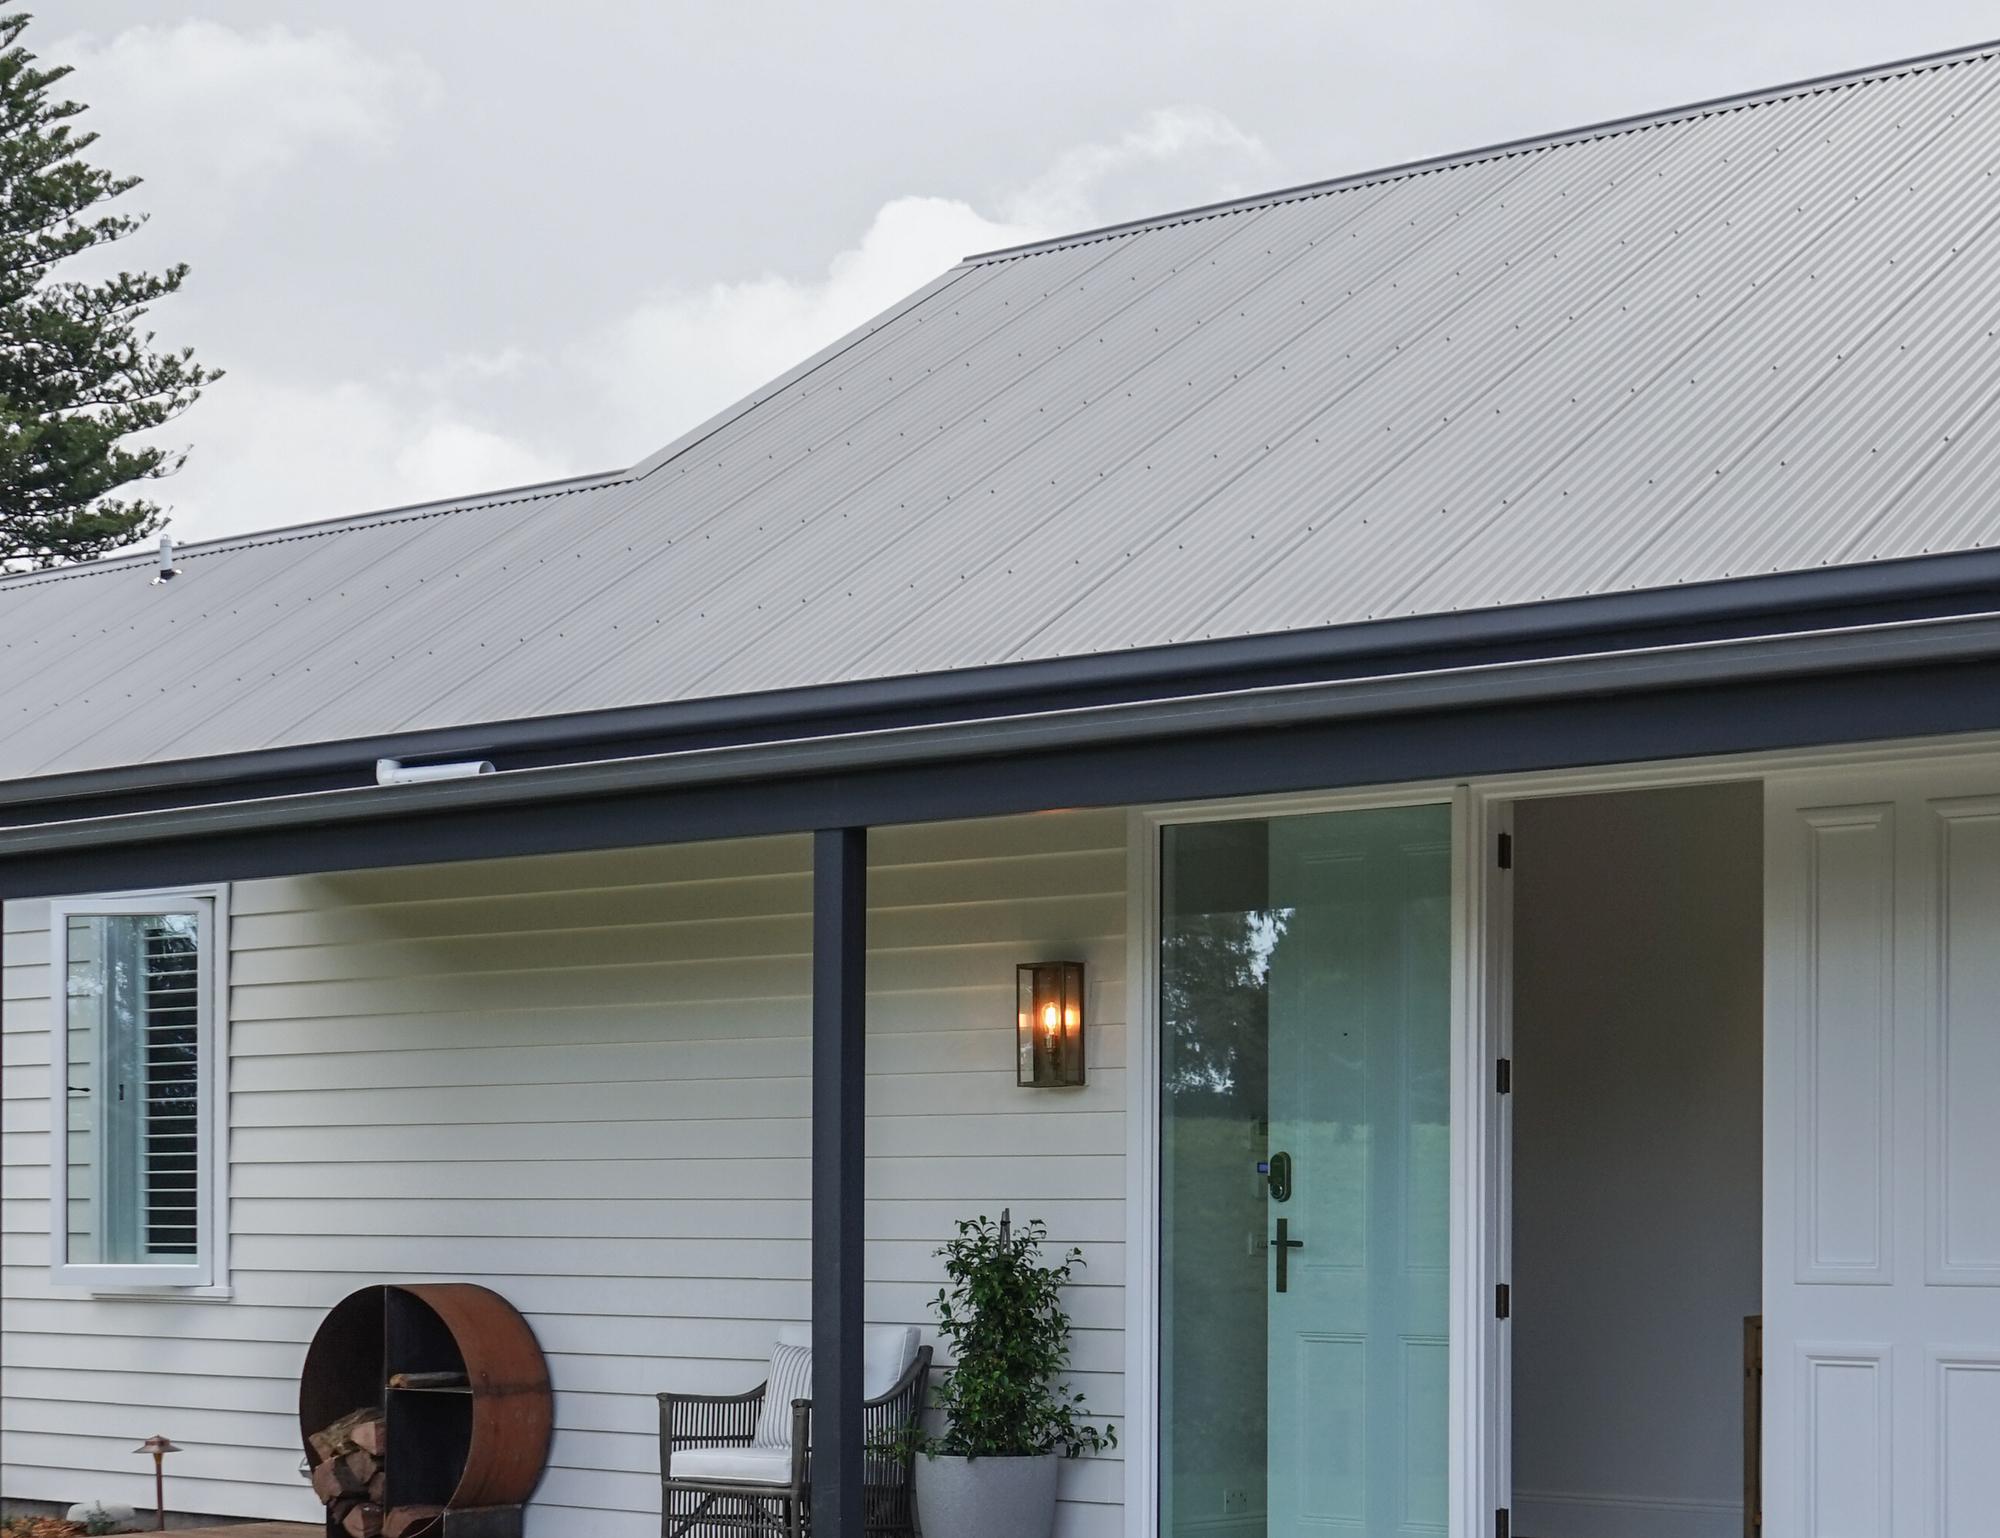 Victoria from Berry, NSW loves Roofing, Guttering & Fascia, Patio & Pergola made from COLORBOND® steel in colour Ironstone®